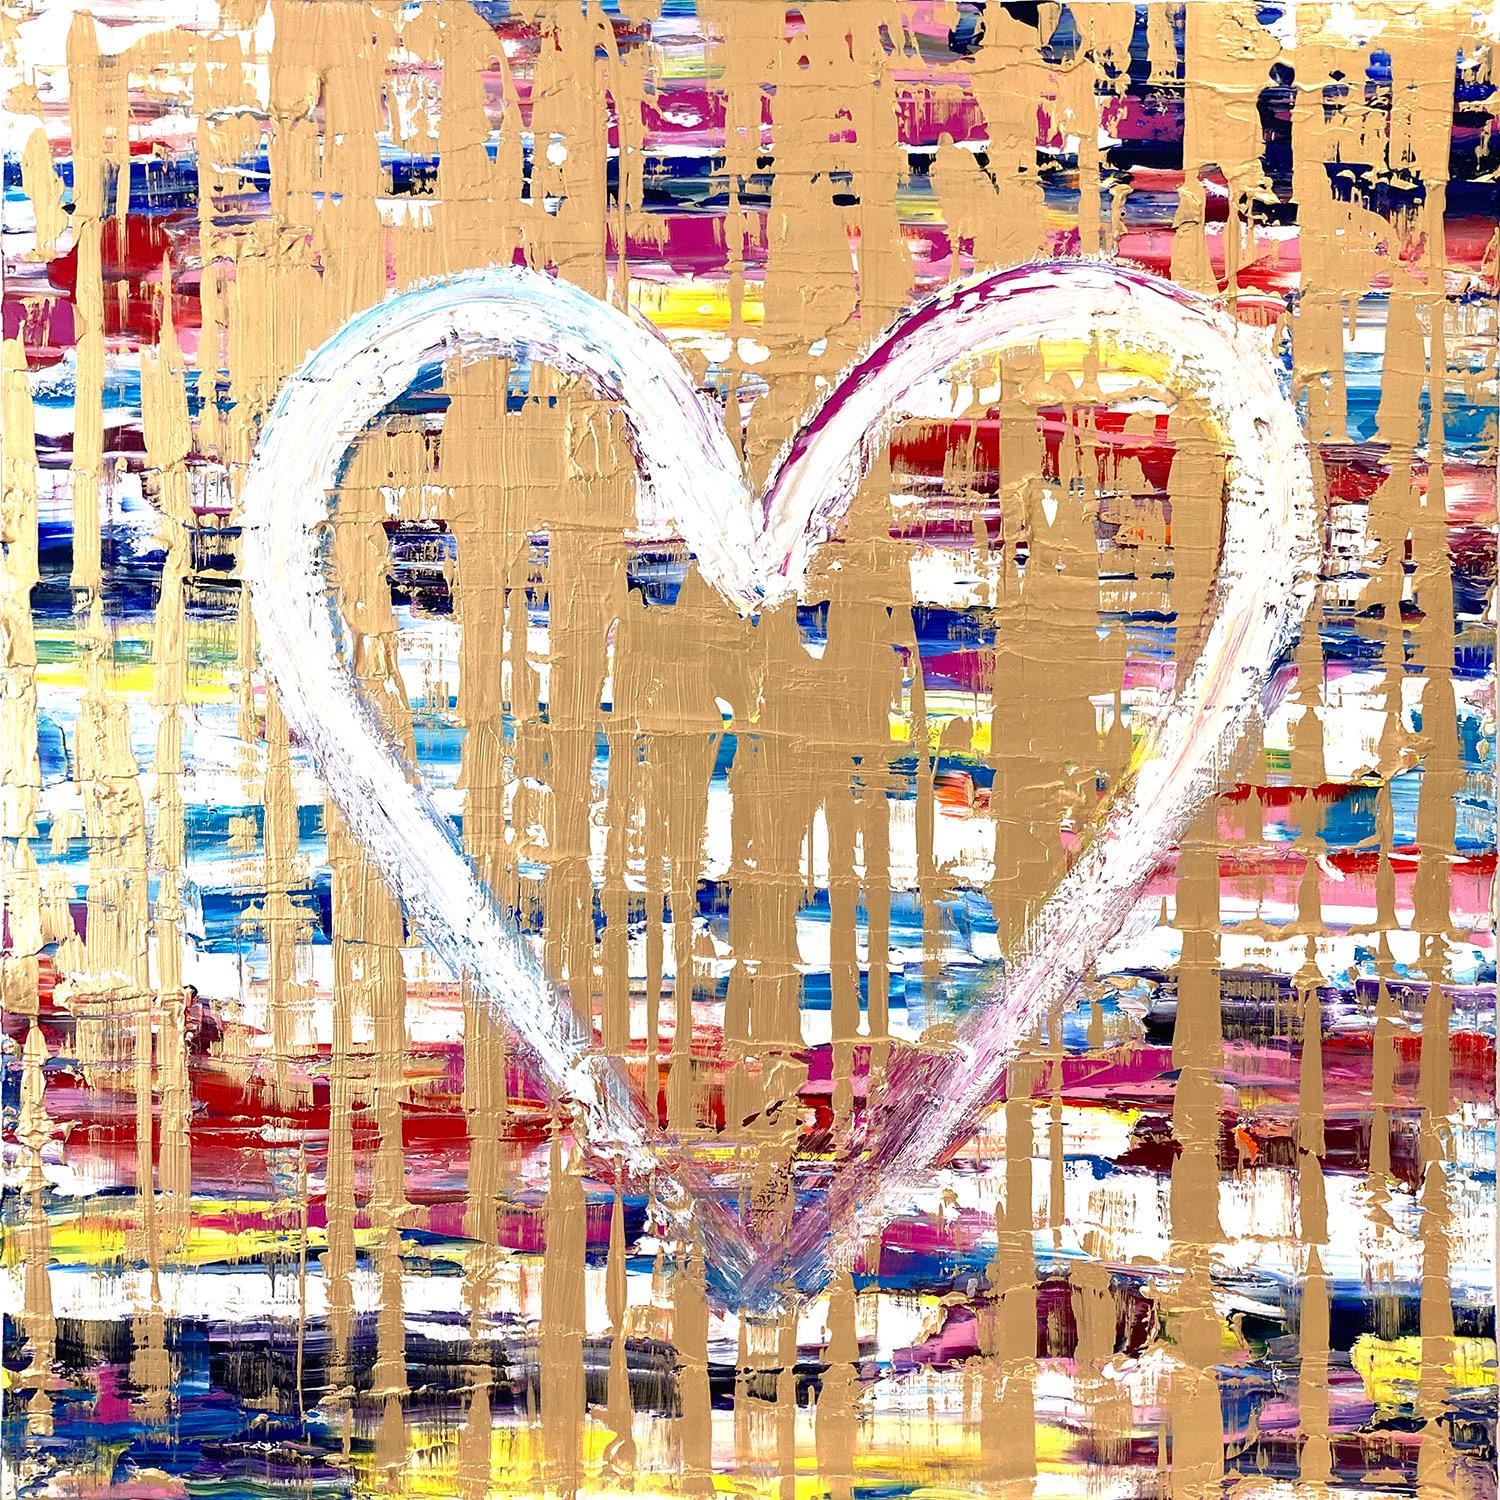 Cindy Shaoul Abstract Painting - "My Heart Rocks" Colorful Contemporary Pop Mixed Media Oil Painting on Canvas